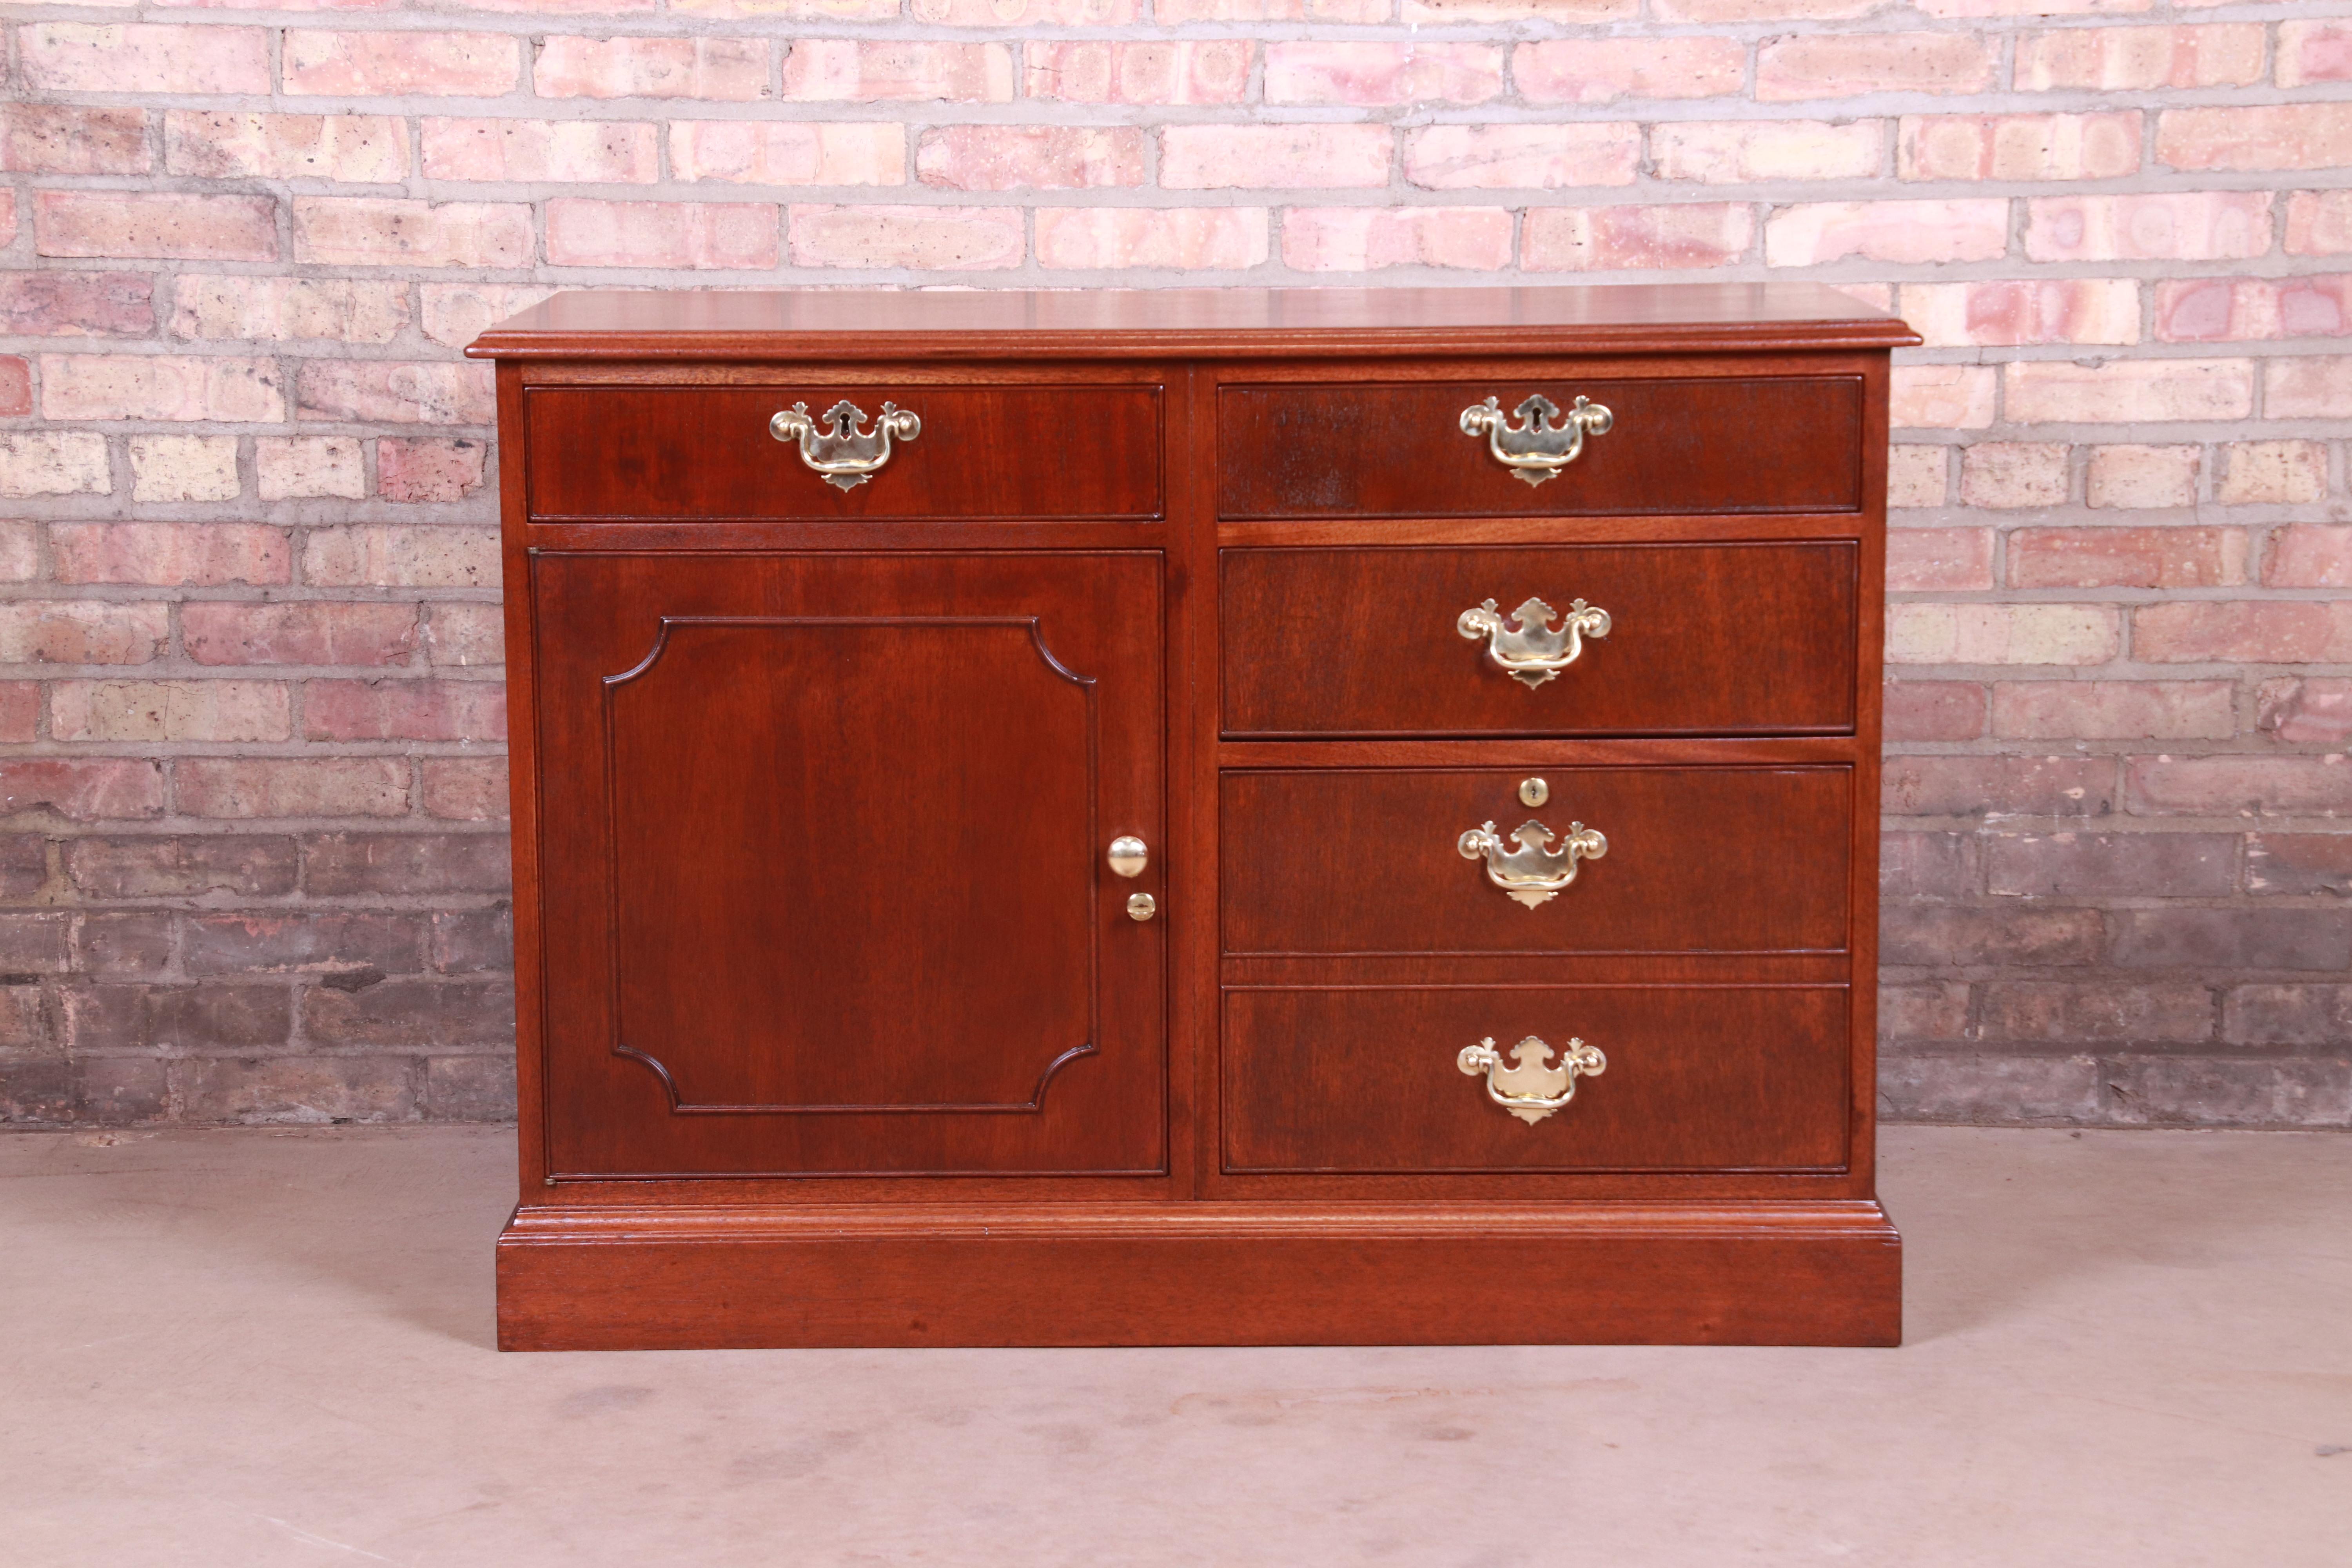 A gorgeous American Chippendale style compact credenza or bar cabinet

By Kittinger

USA, Mid-20th century

Mahogany, with original brass hardware. Cabinet locks, and key is included.

Measures: 42.63